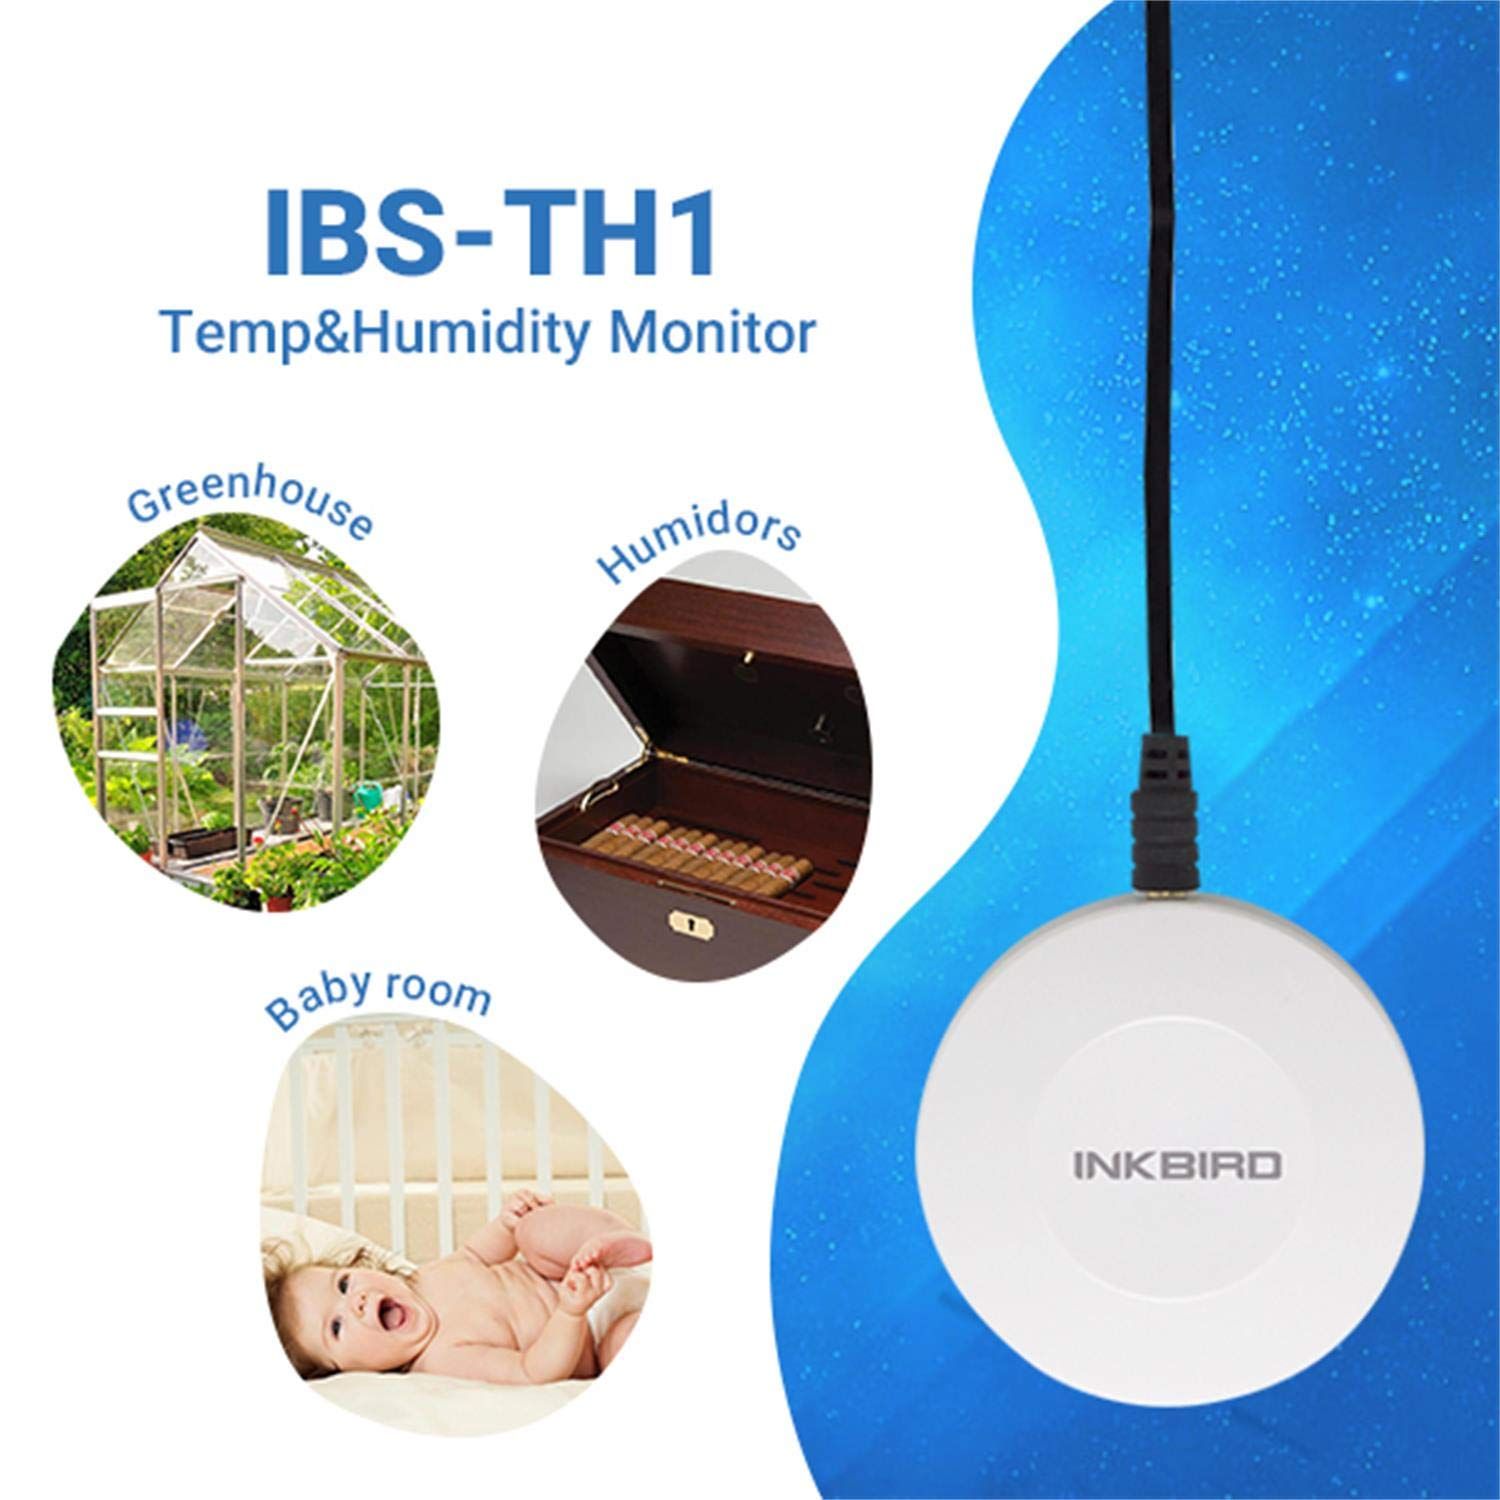 Inkbird Smart Thermometer Temperature and Humidity Monitor Hygrometer  Indoor, Free APP for iOS and Android, IBS-TH2 Plus Version Supports  External